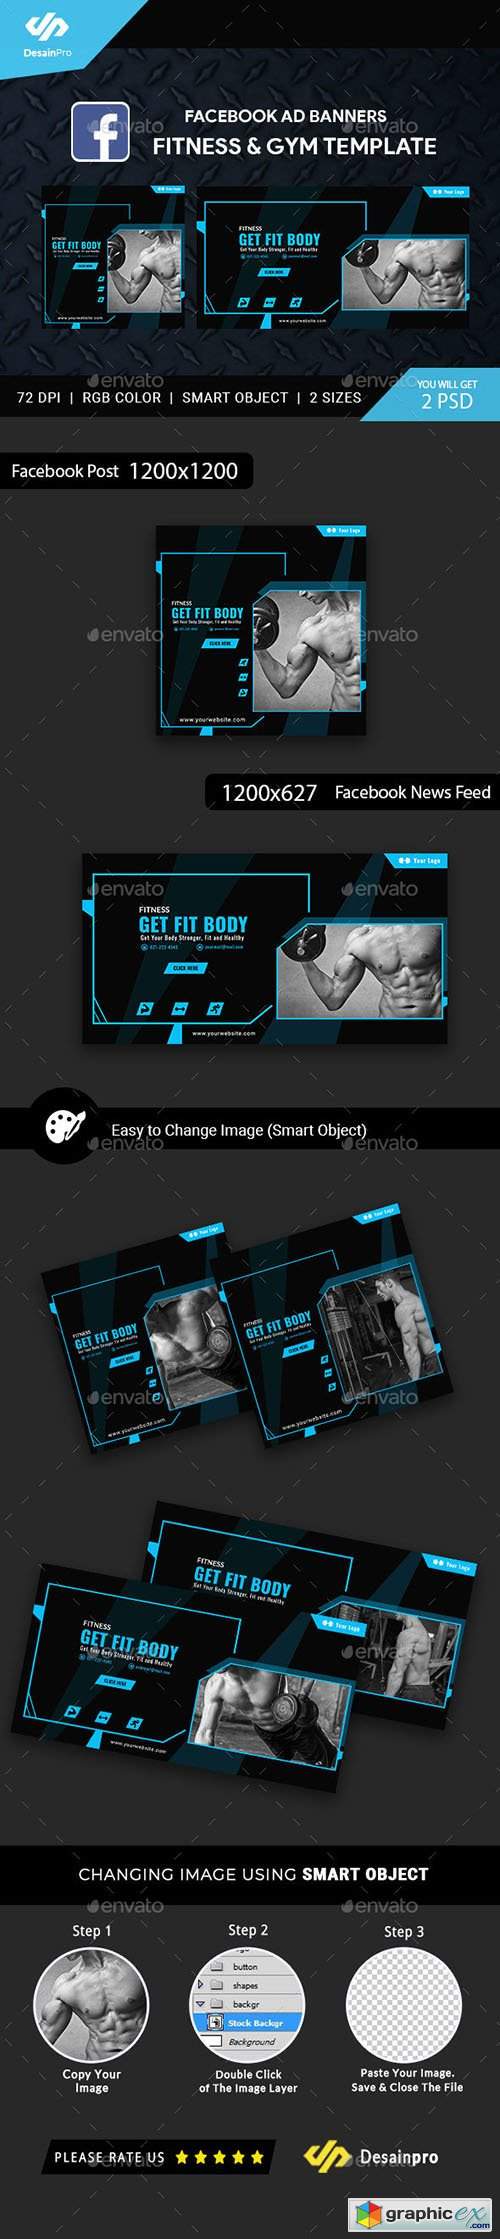 Fitness and Gym Facebook Ad Banners - AR